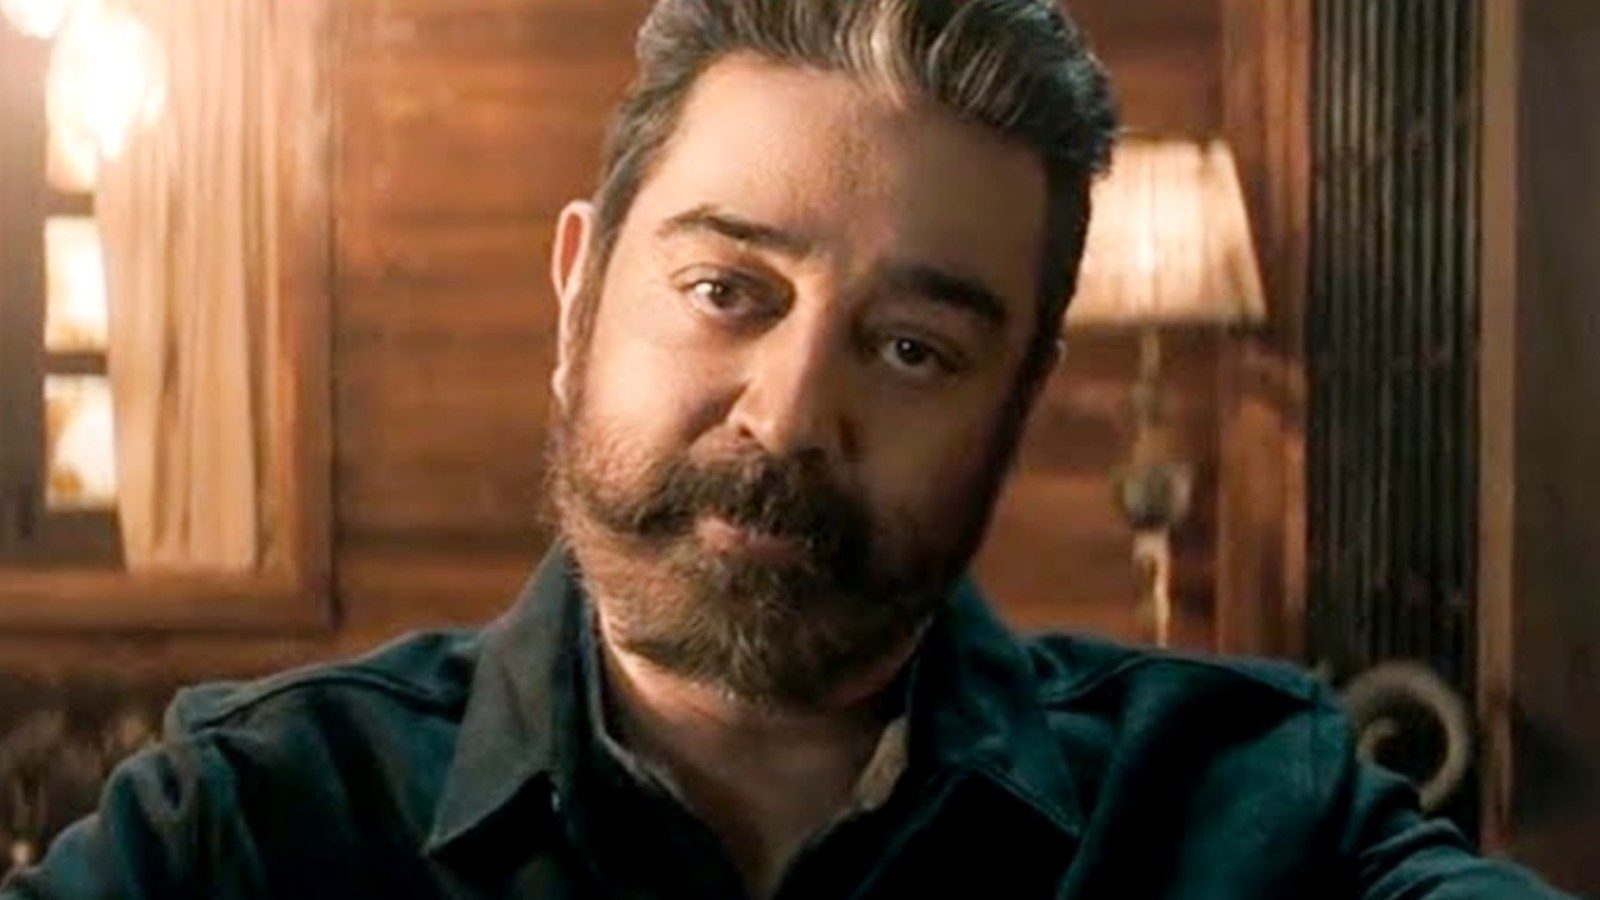 The 48 Second Video Of Kamal Haasan's Film Vikram Increased The Excitement Of The Fans, Got More Than 1 Crore Views